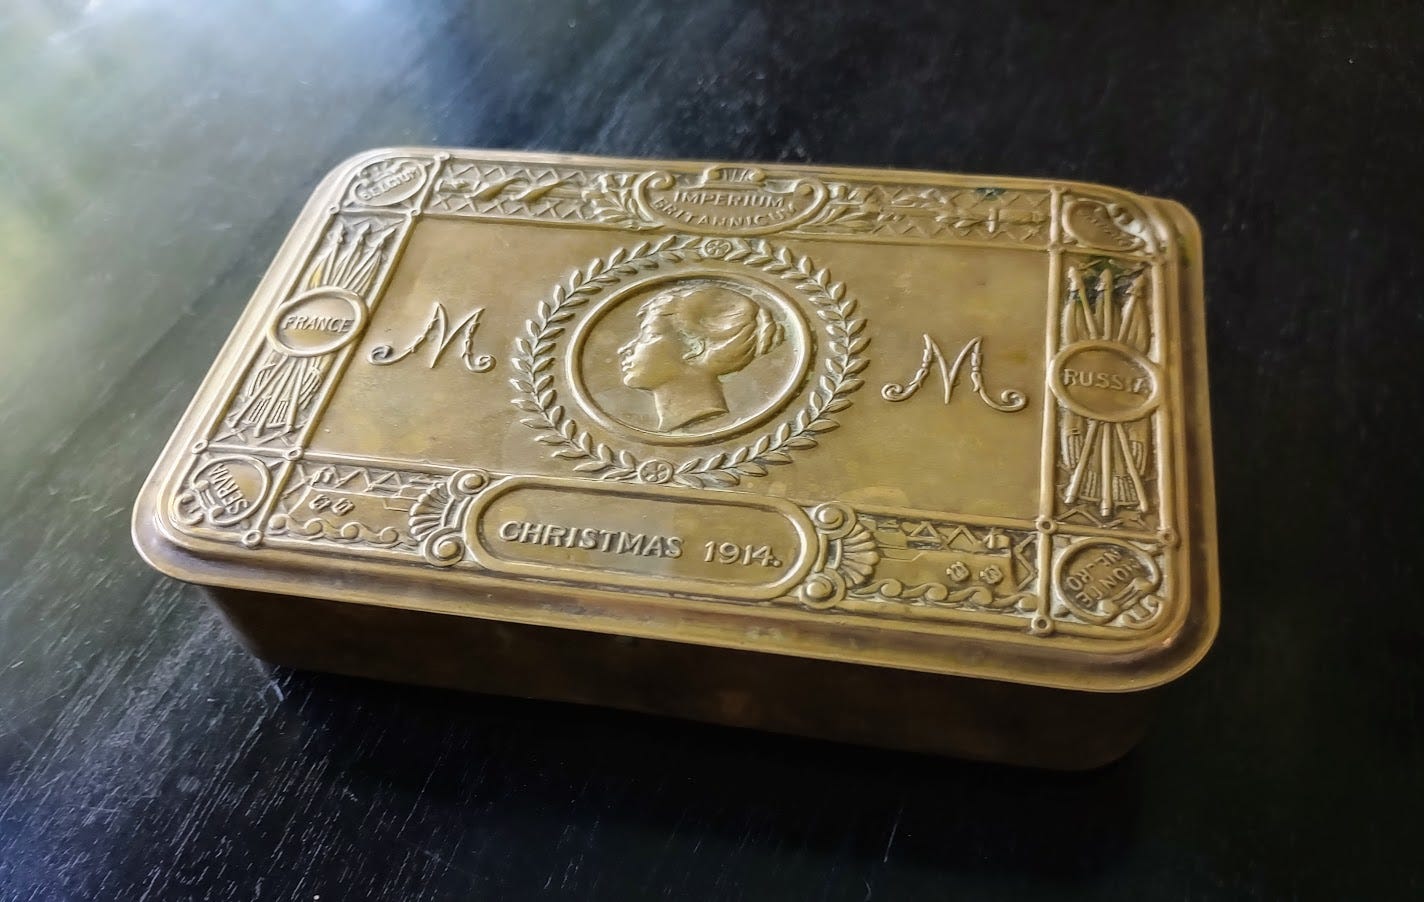 Ornate brass tin with image of woman's head, M monograph, and Christmas 1918 on top. 